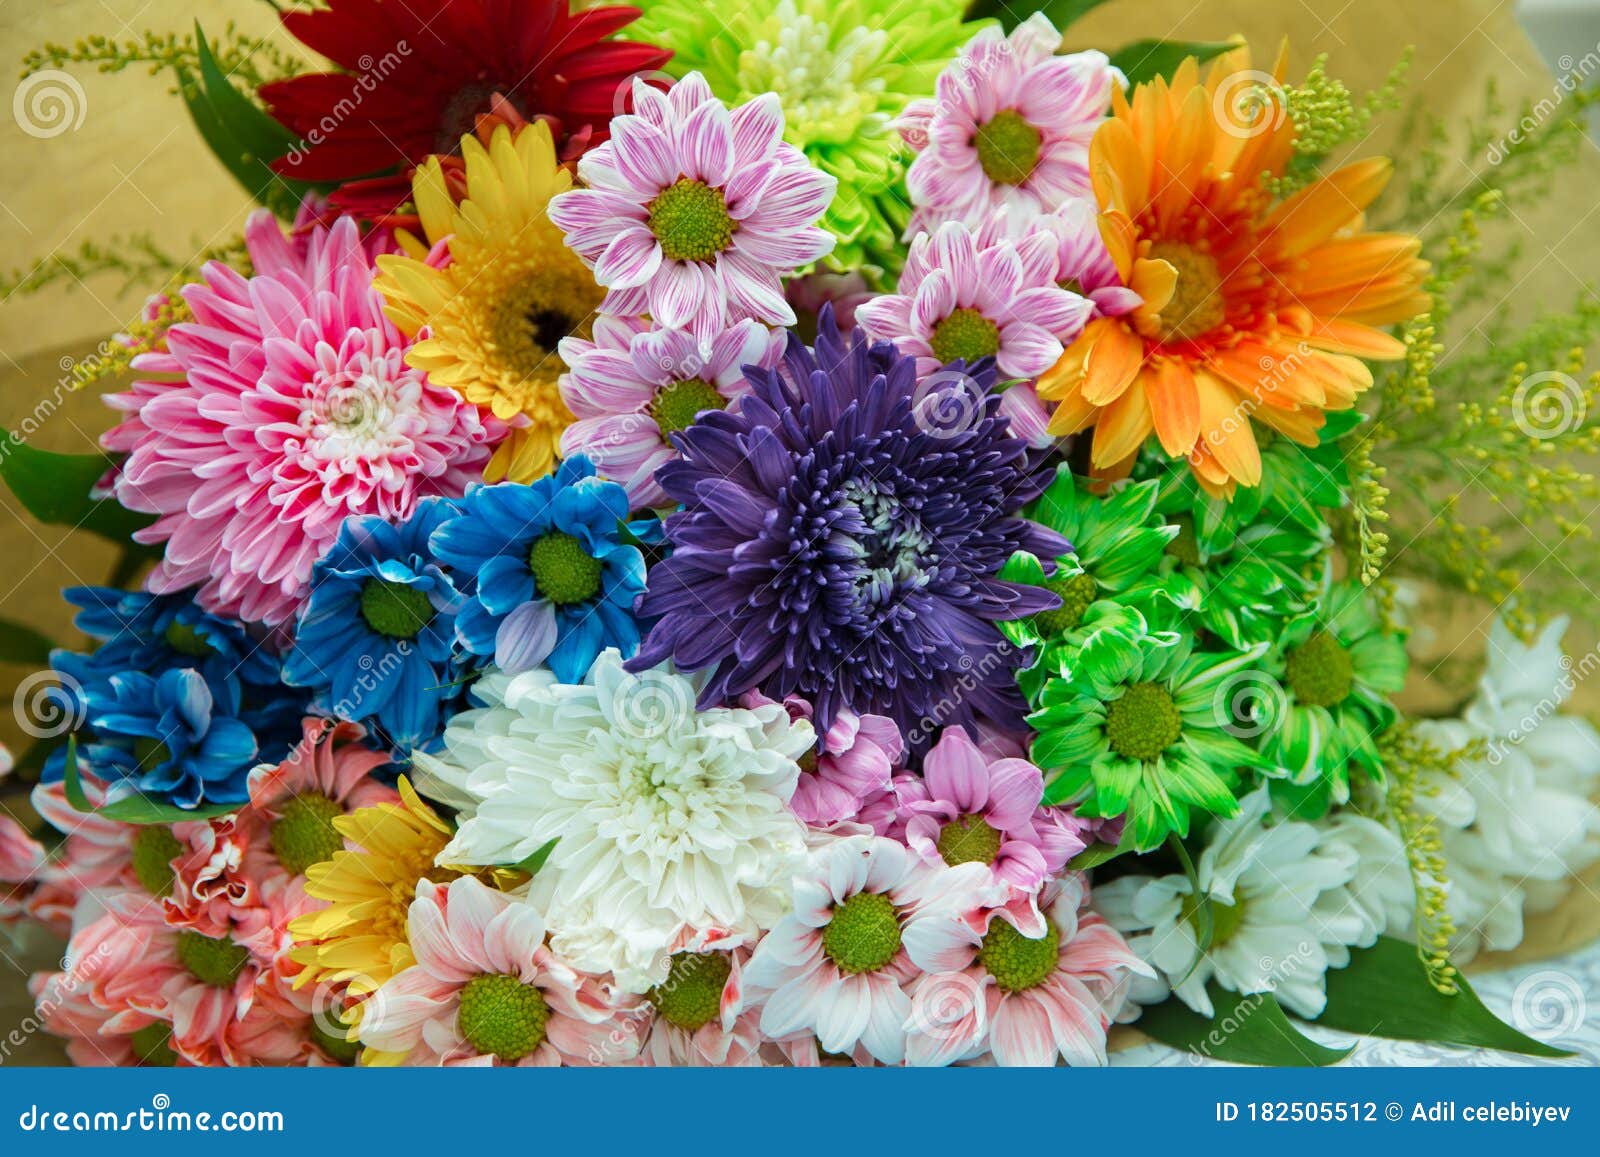 A Bouquet of Flowers on the Table.Rainbow Daisies. Chrysanthemum ...